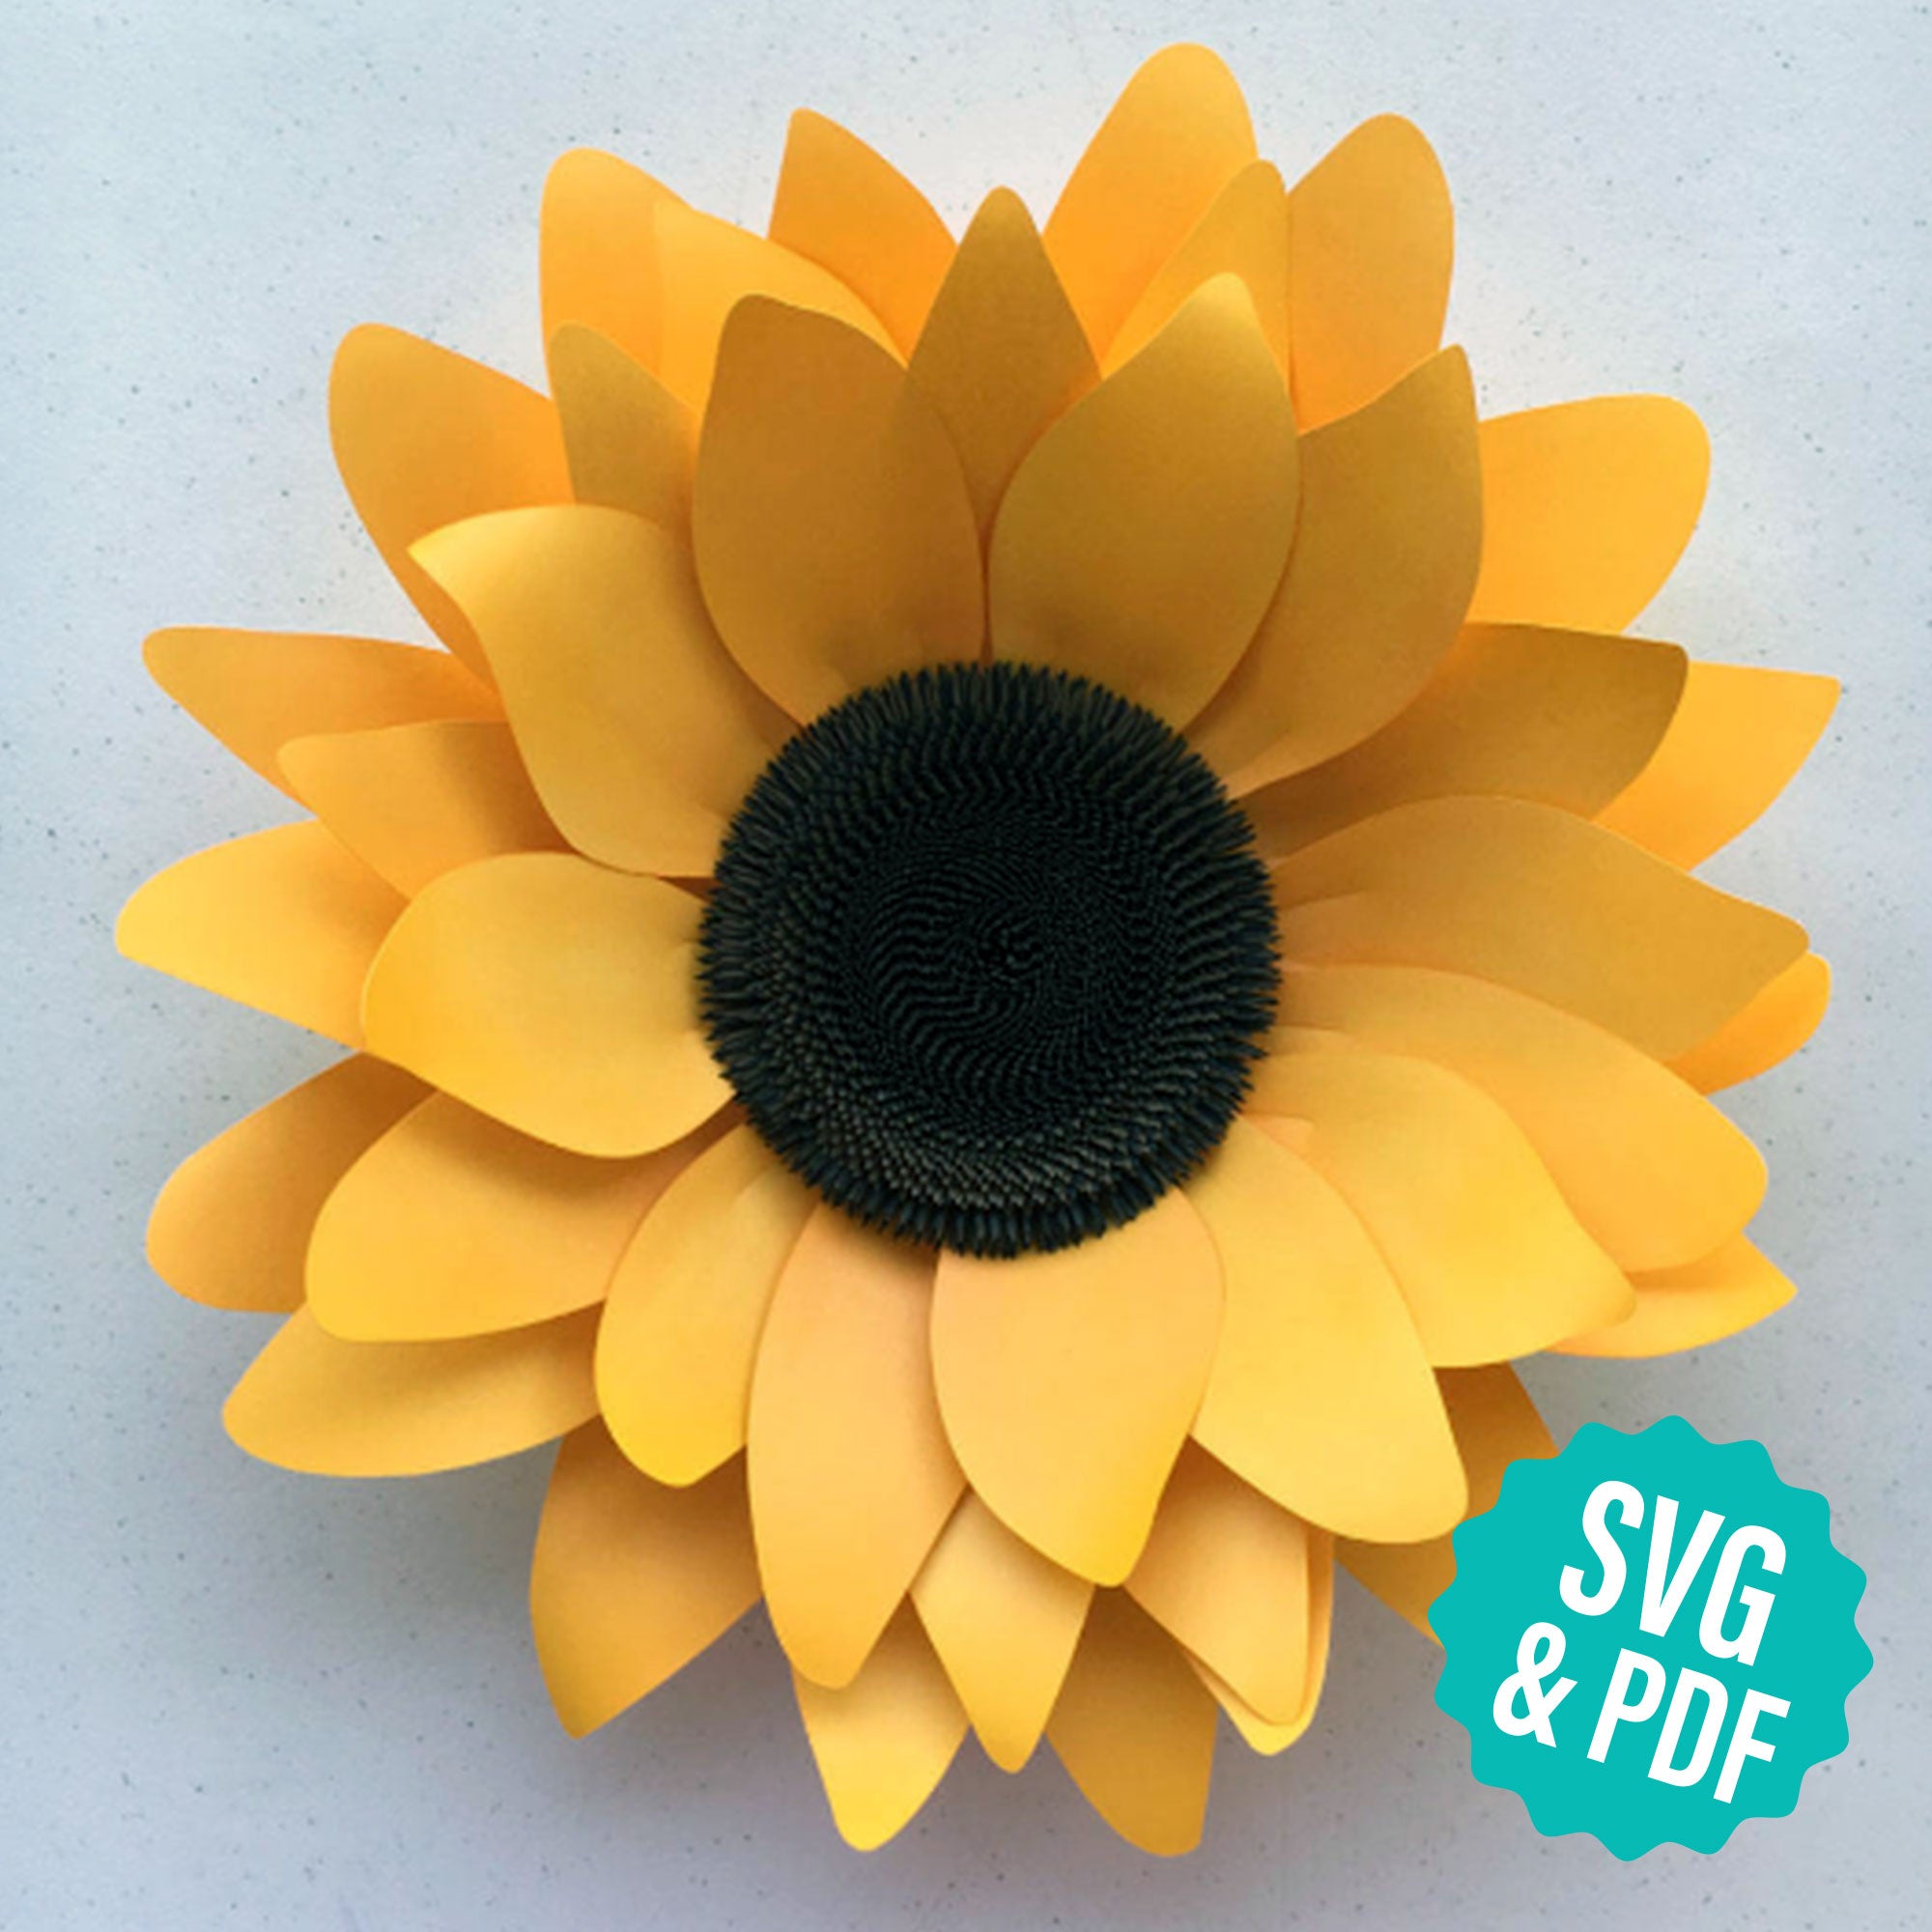 Craft Paper Sunflower Bouquet: Adding Life and Color to Cards